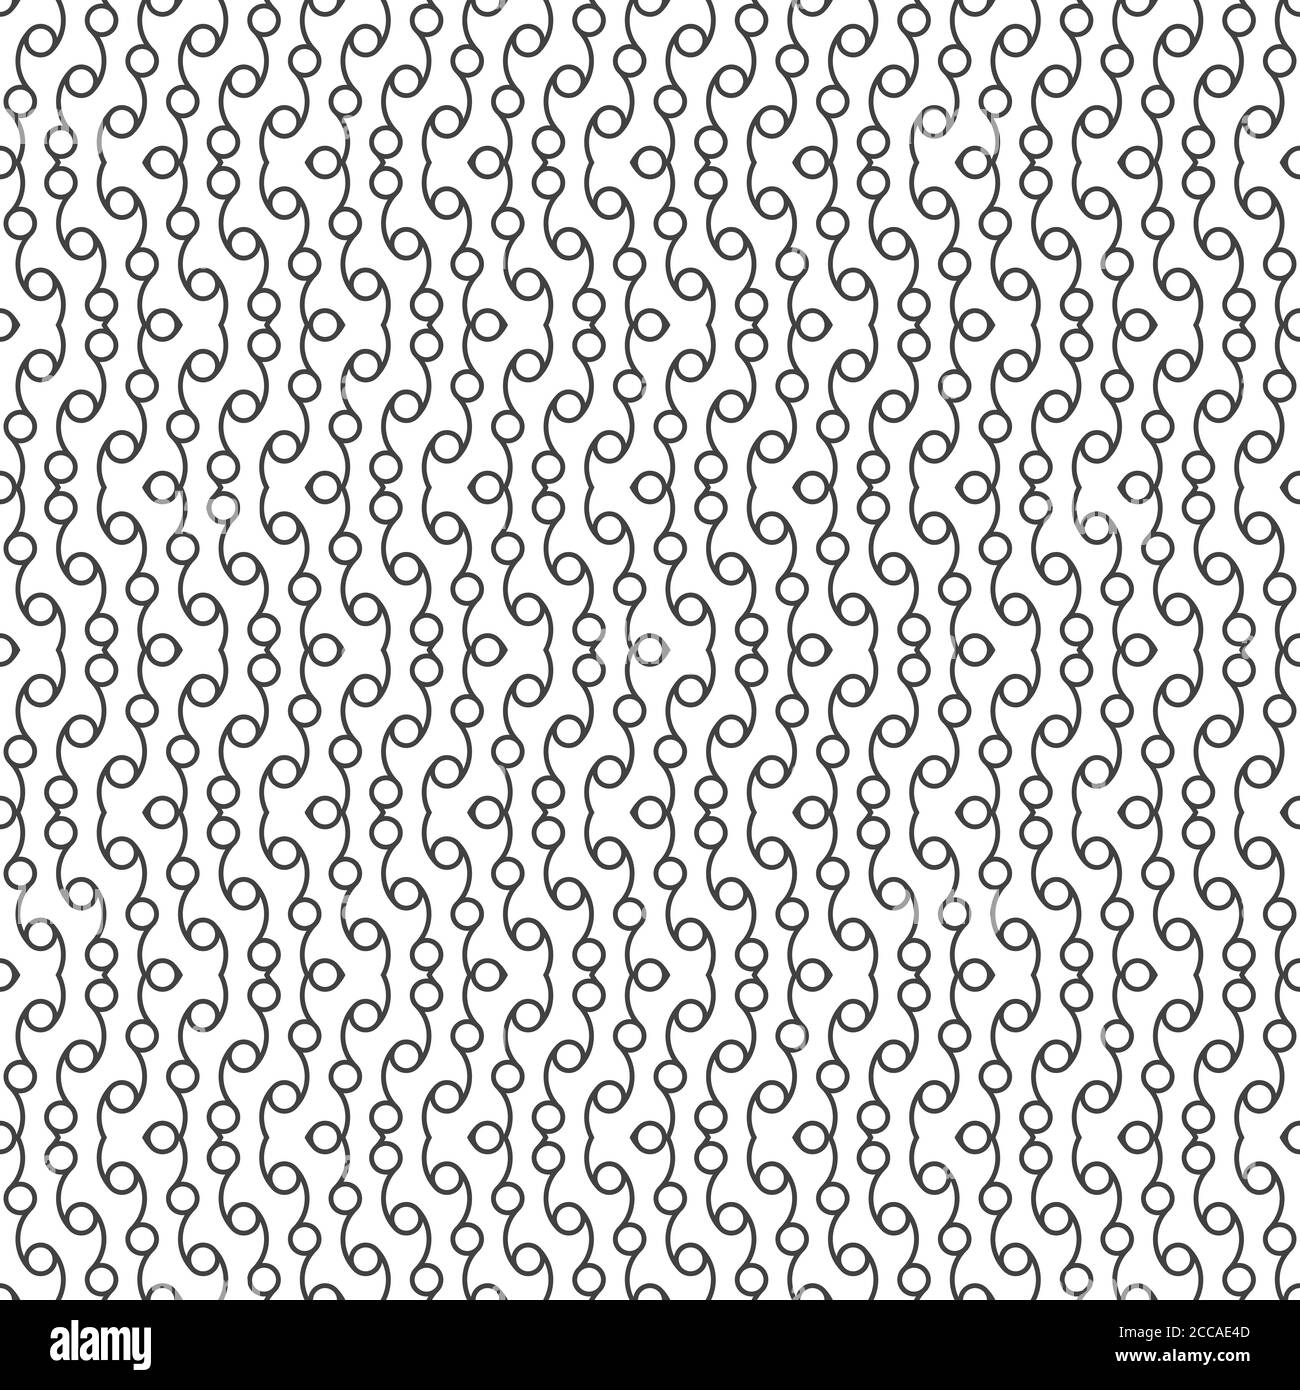 Seamless pattern. Modern stylish texture. Regularly repeating monochrome ornament with circles, dots, arcs. Vector element of graphical design Stock Vector